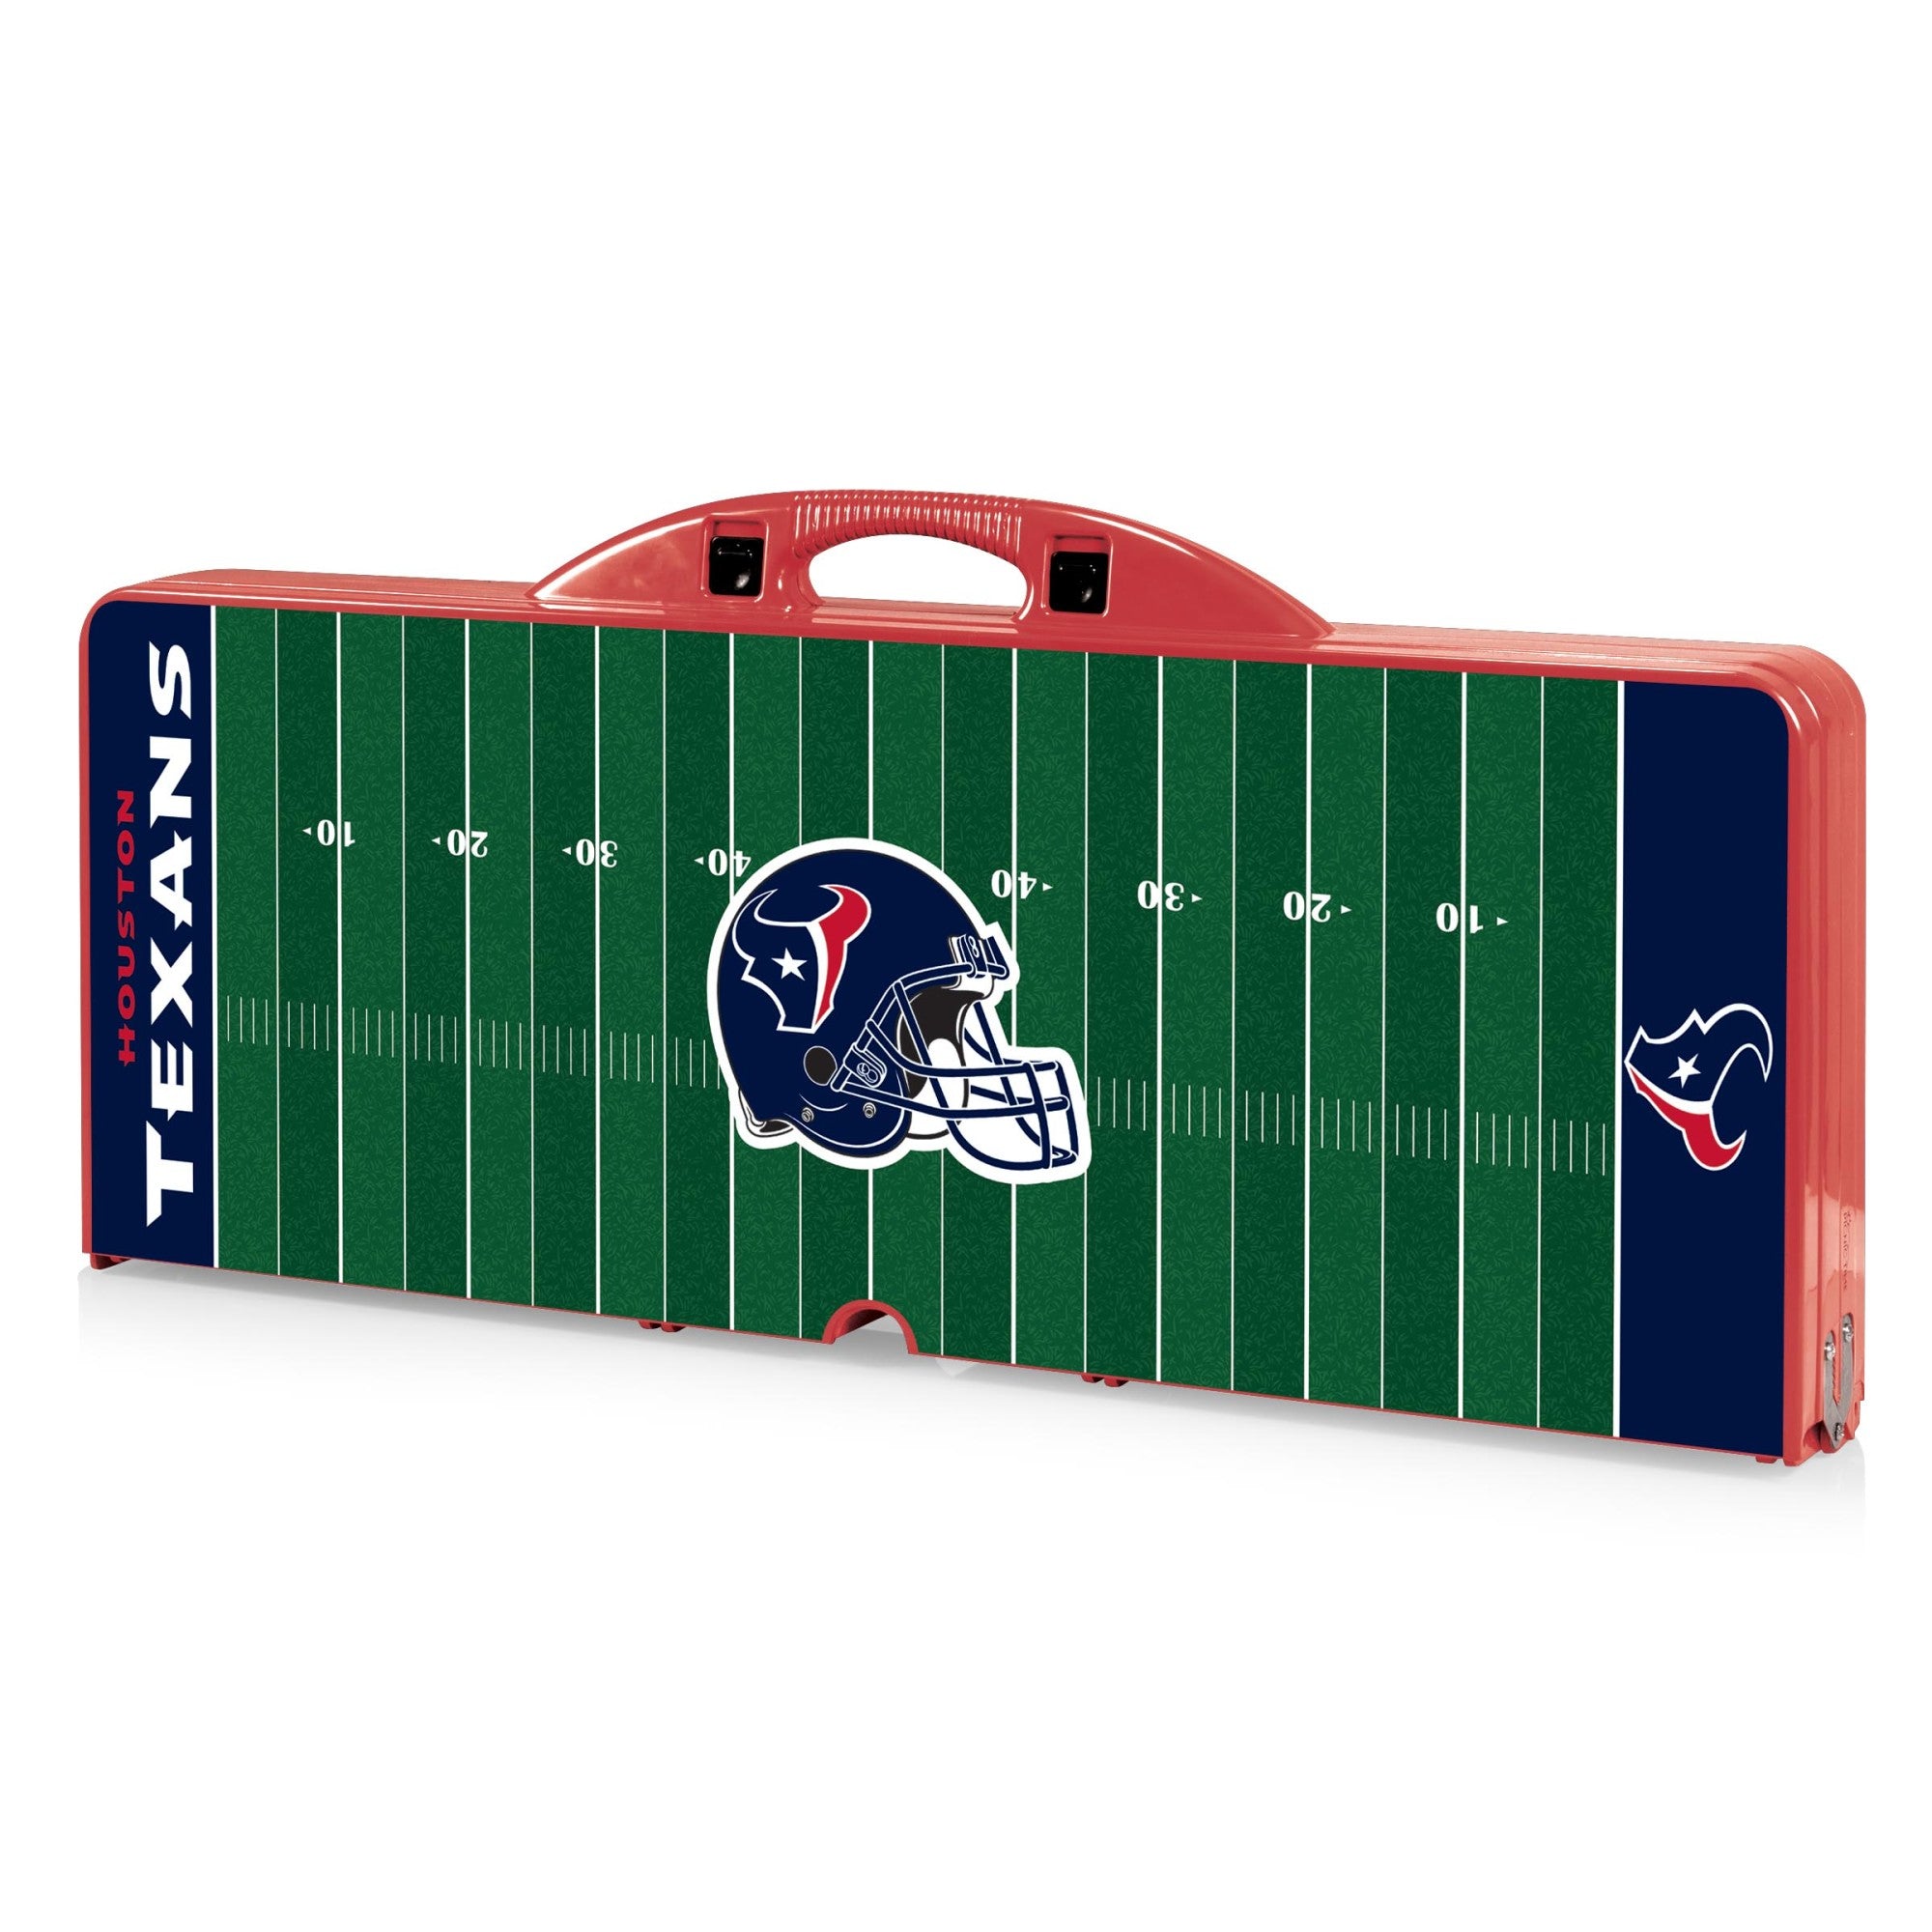 Football Field - Houston Texans - Picnic Table Portable Folding Table with Seats